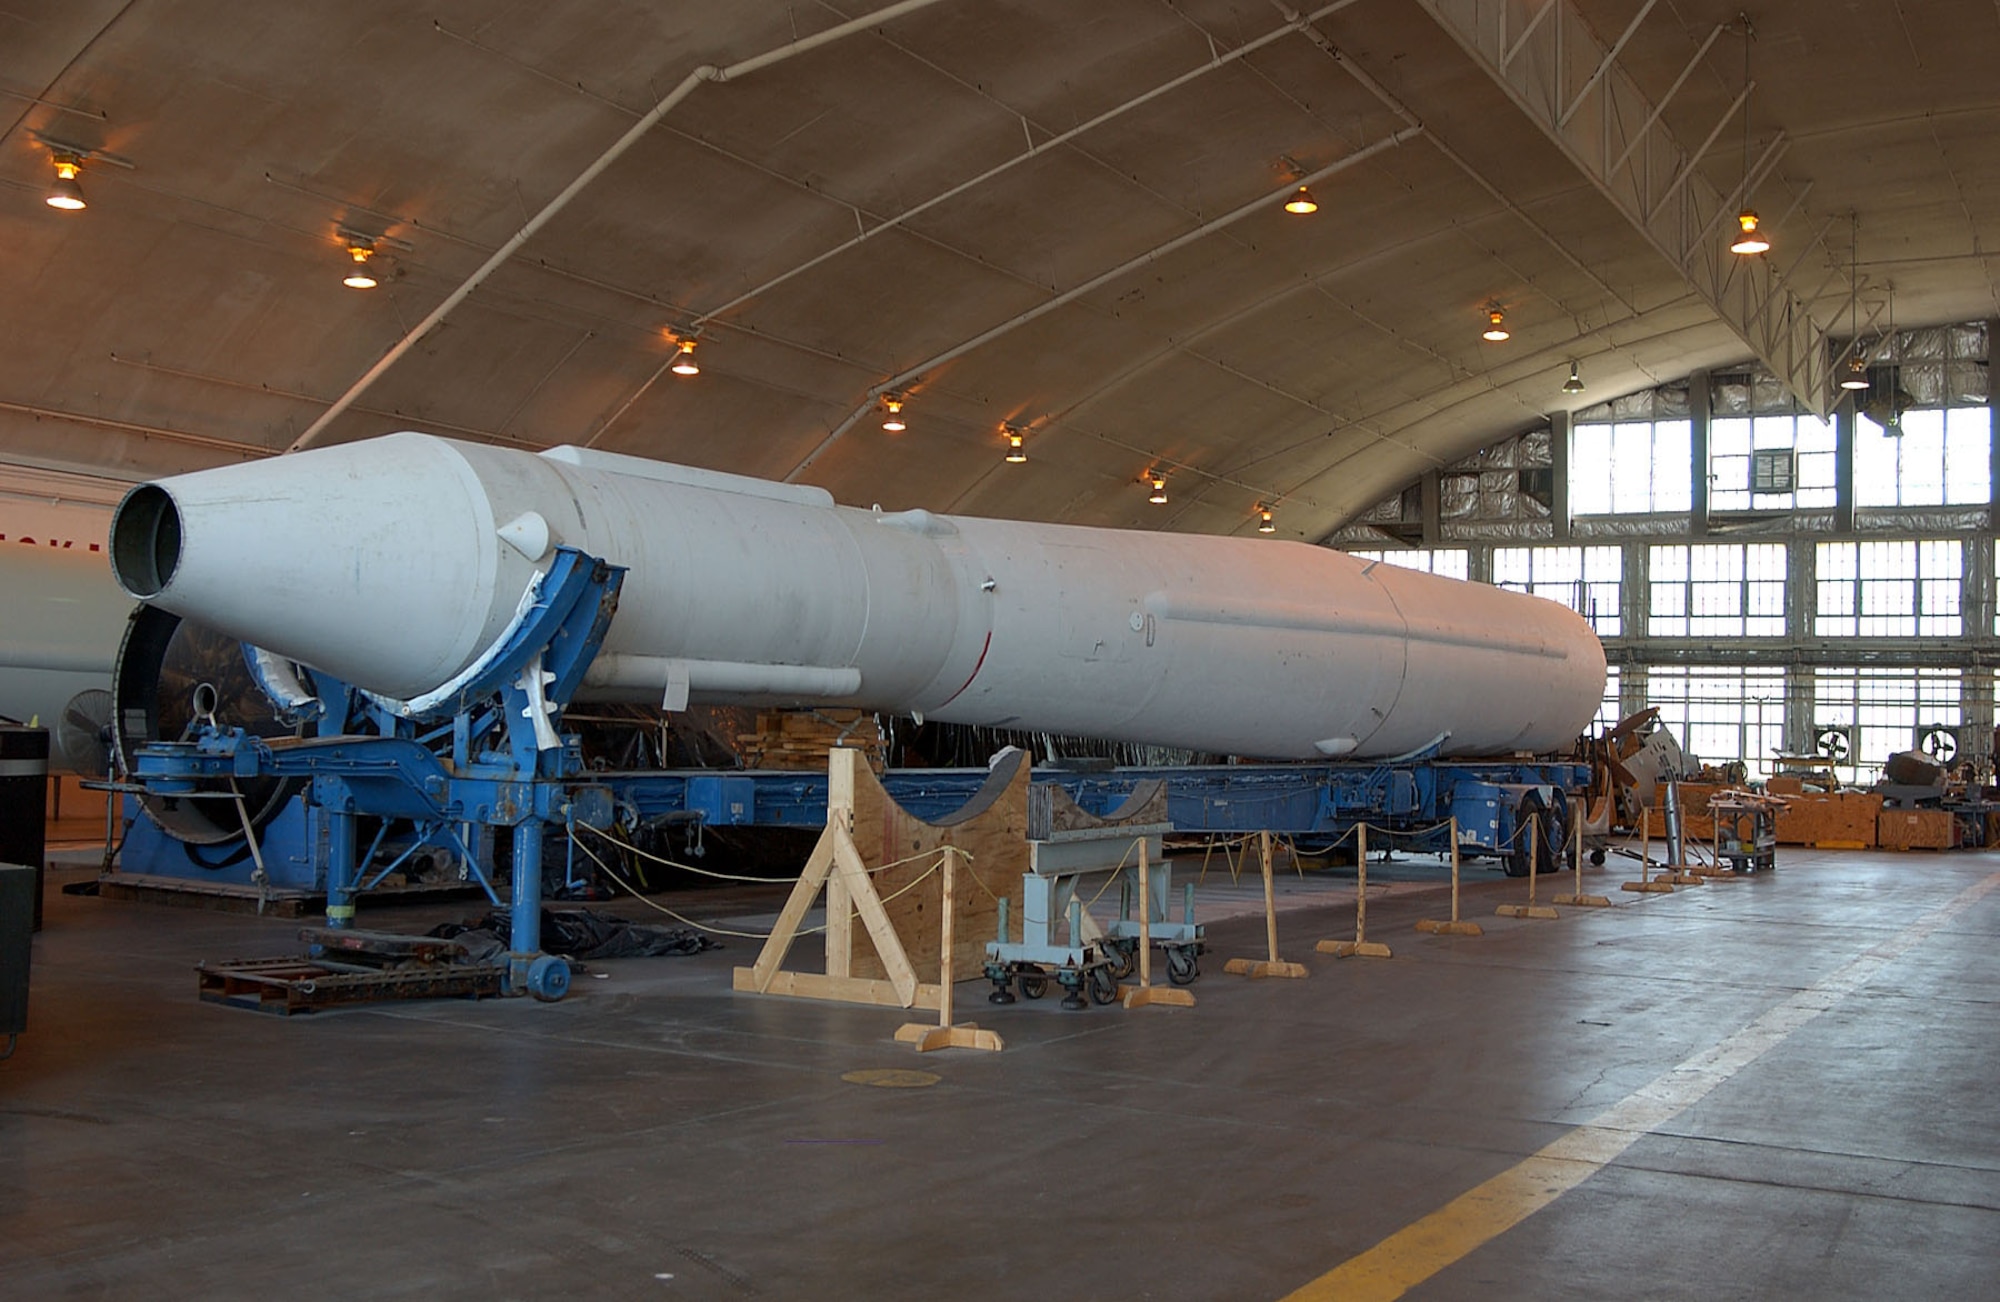 DAYTON, Ohio (07/2005) -- Thor Agena missile in the restoration hangar at the National Museum of the United States Air Force. (U.S. Air Force photo)